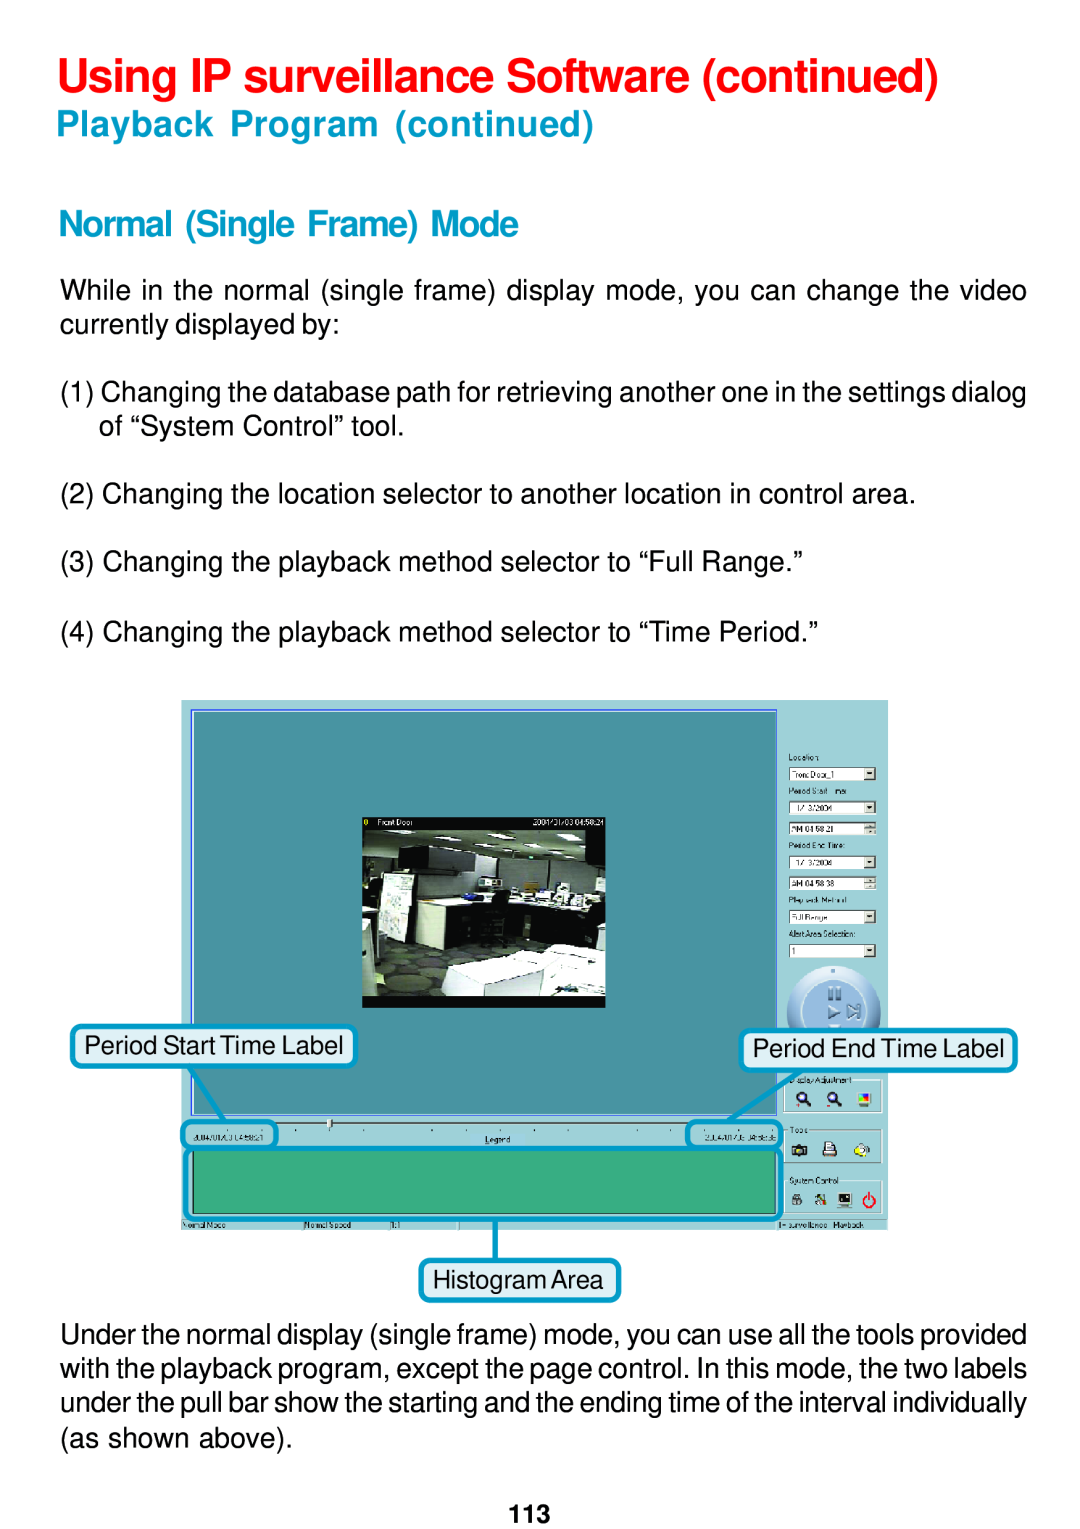 D-Link DCS-5300 manual Playback Program continued Normal Single Frame Mode, Using IP surveillance Software continued 